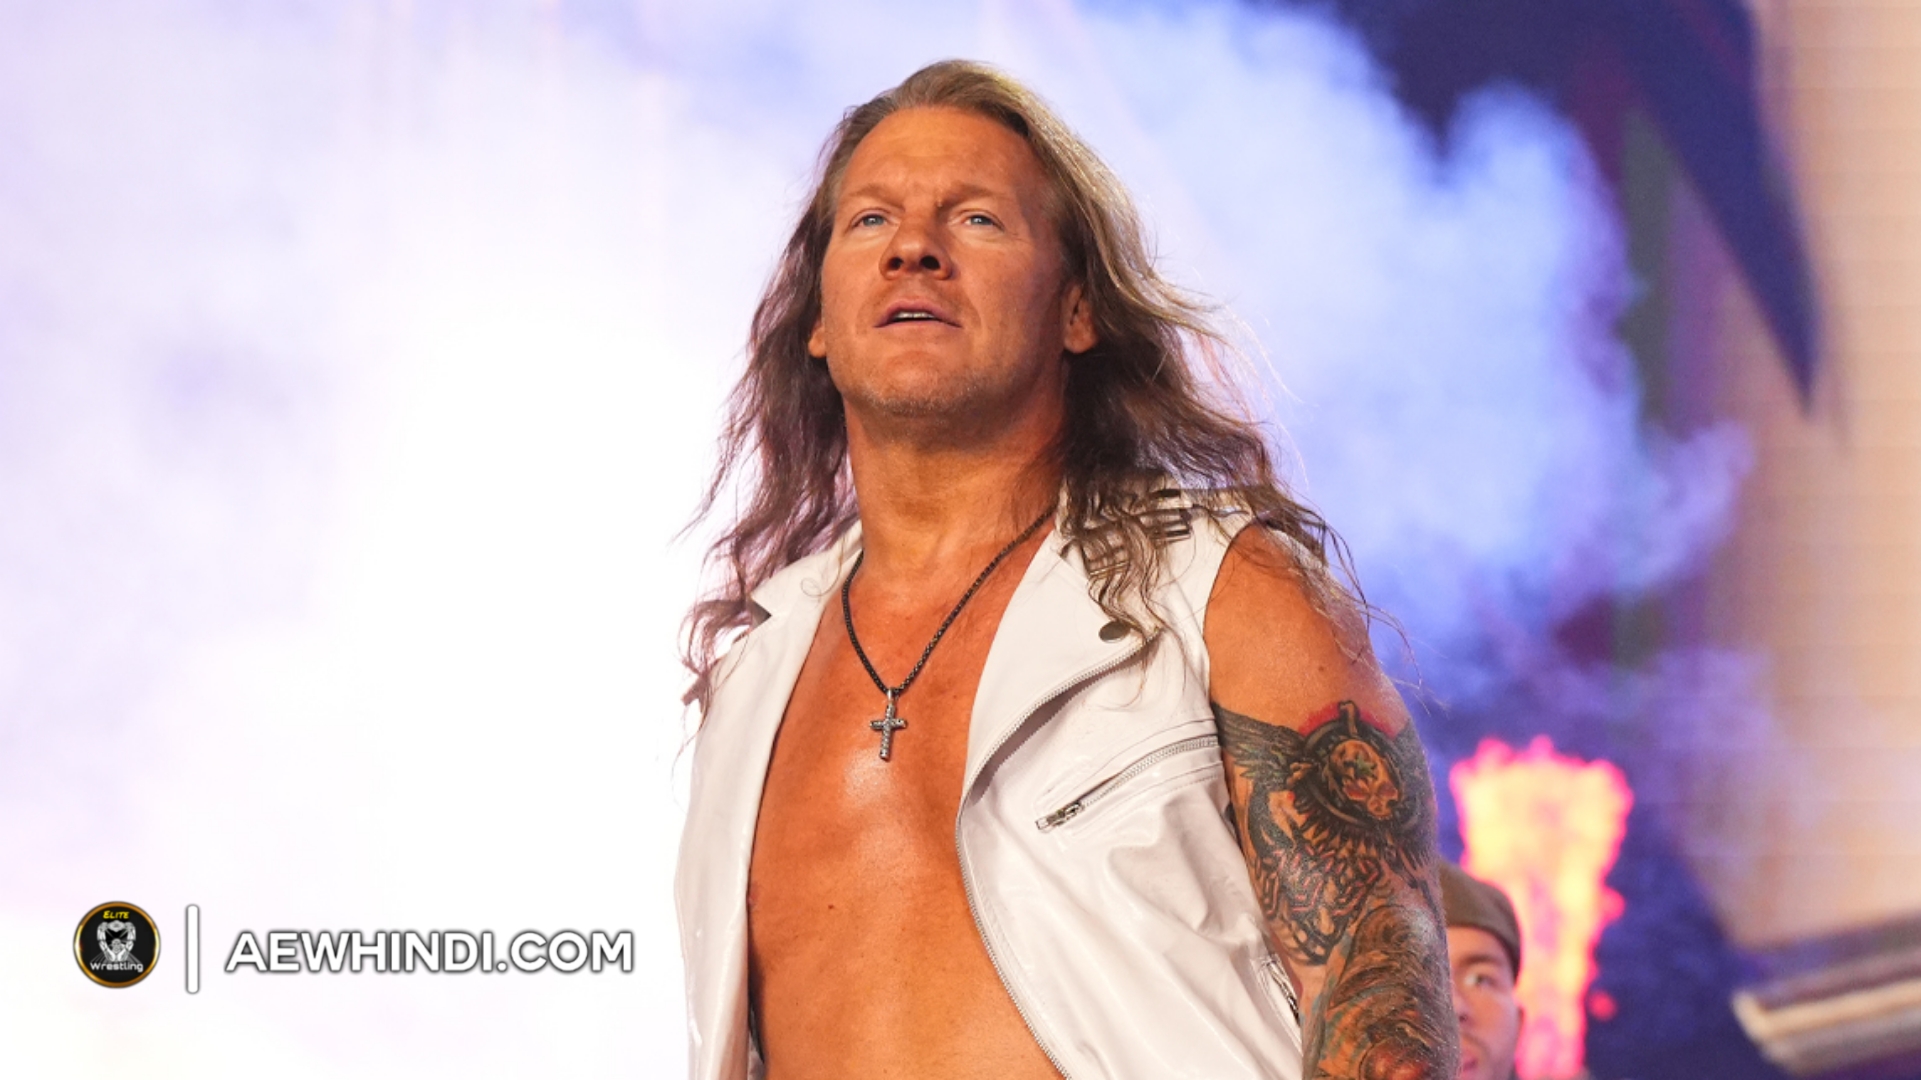 Chris Jericho signs AEW contract extension